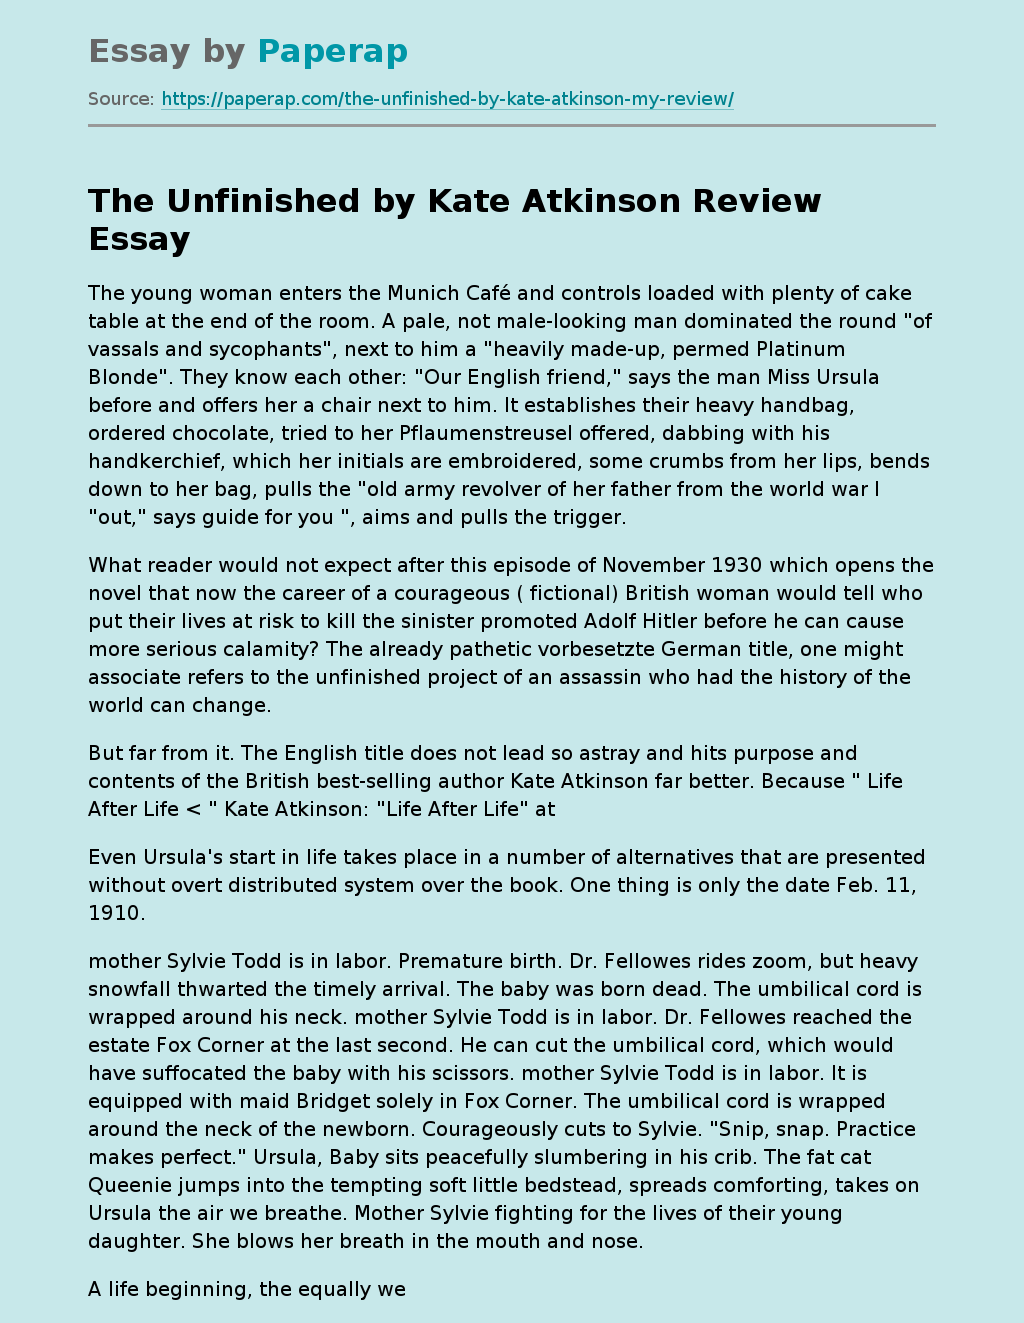 Book "The Unfinished" by Kate Atkinson